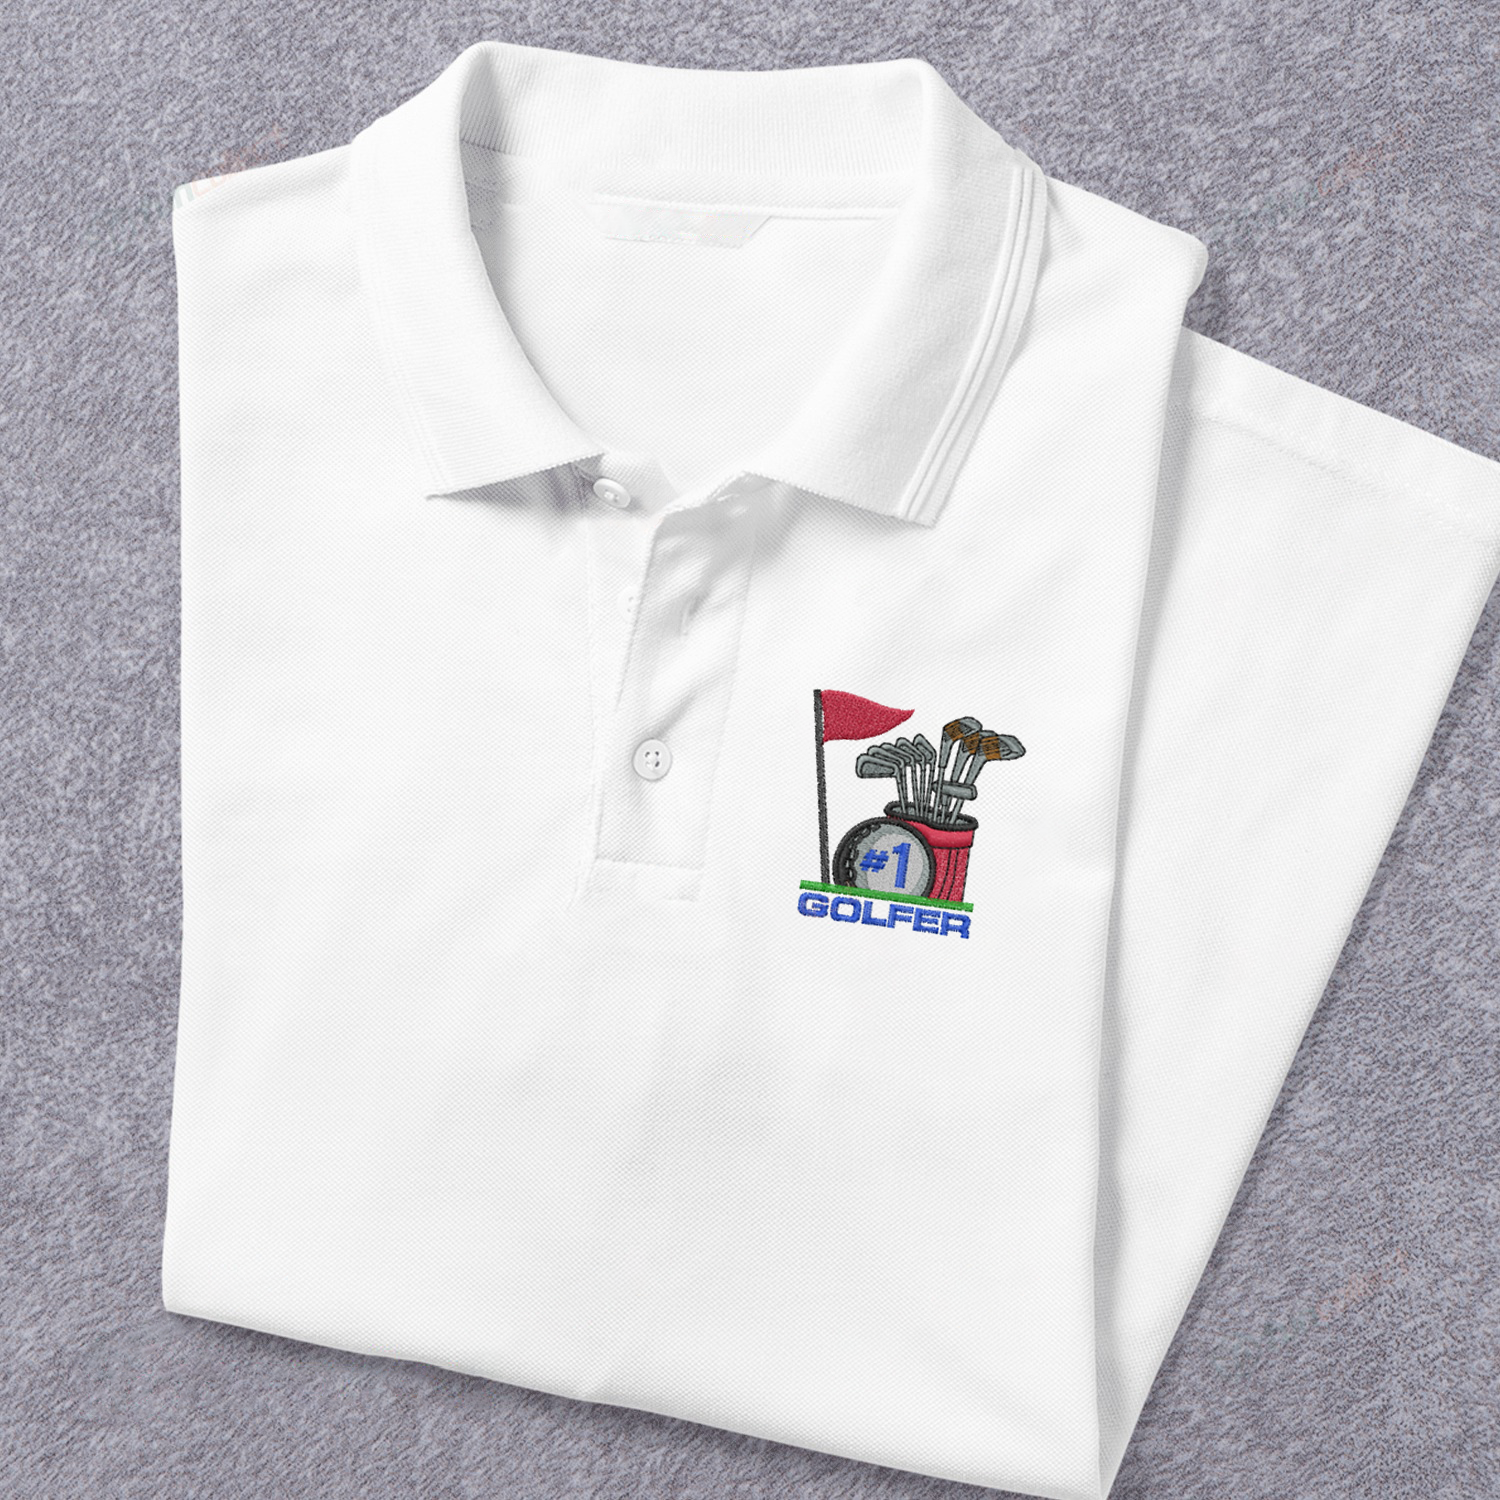 NUMBER 1 GOLFER Embroidery Polo Shirts For Women Or Men/ Perfect Gift for Golf Lover